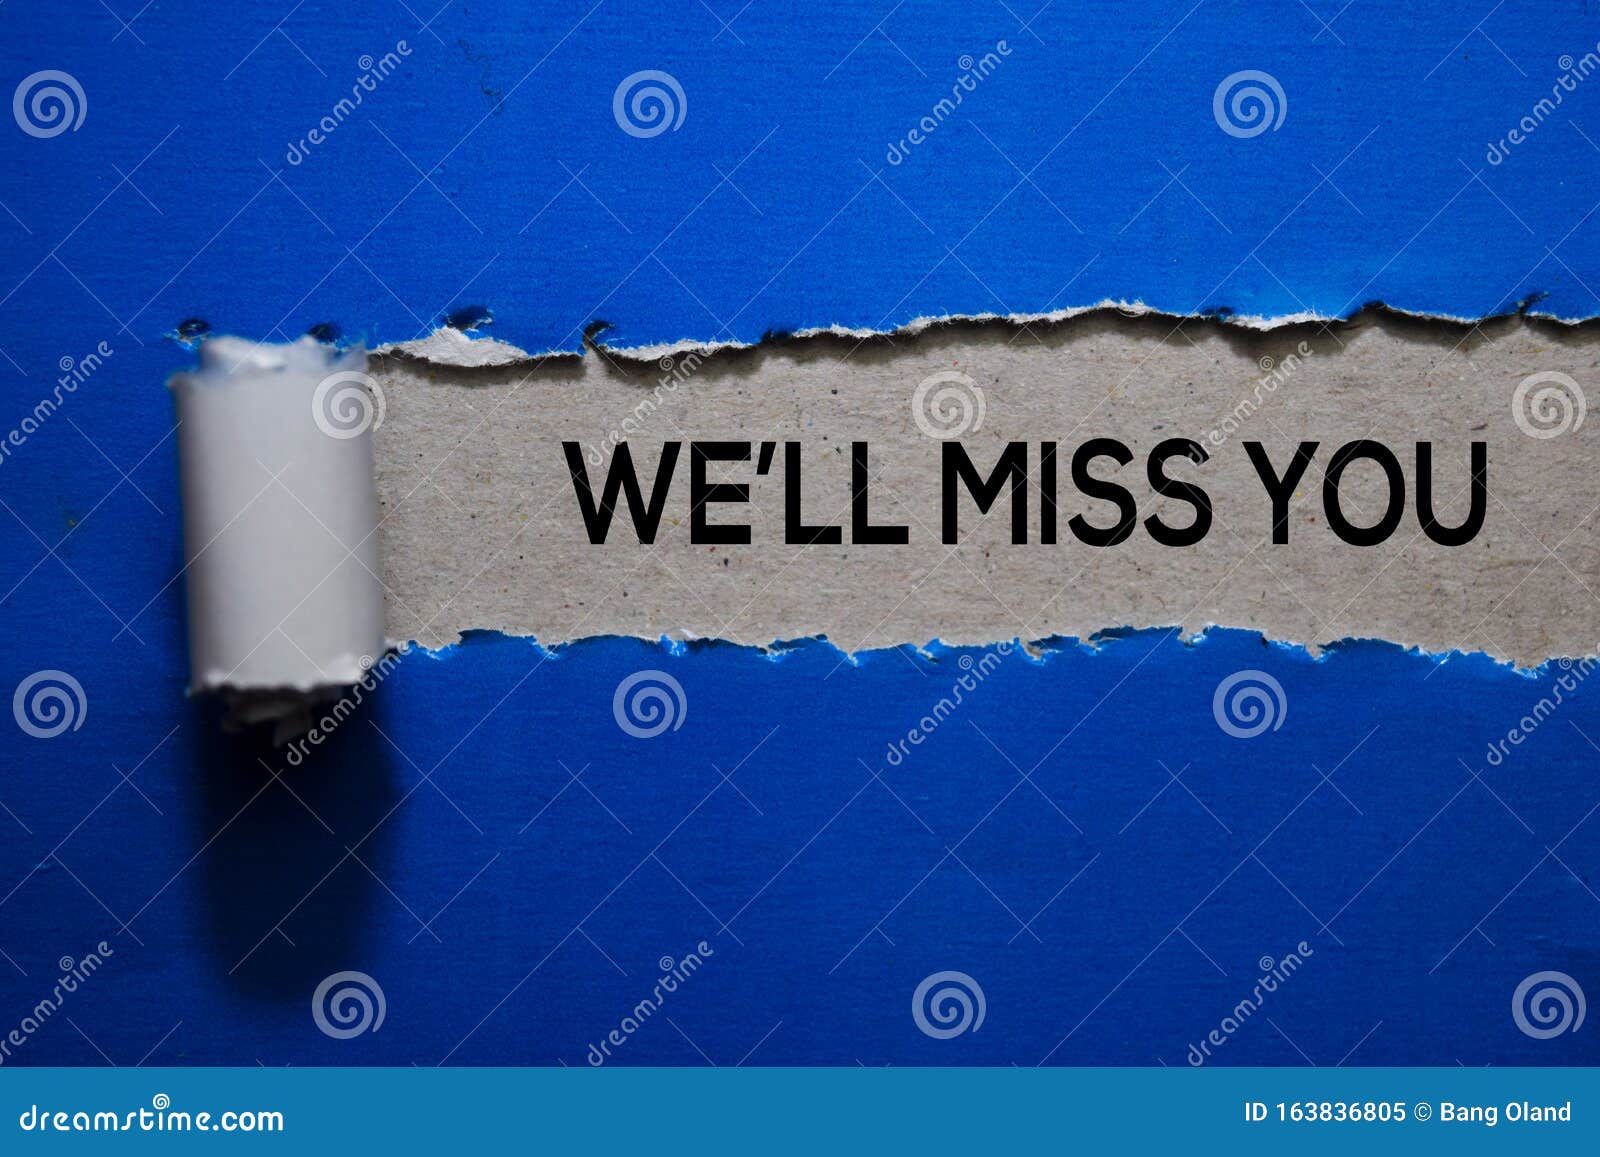 we`ll miss you text written in torn paper